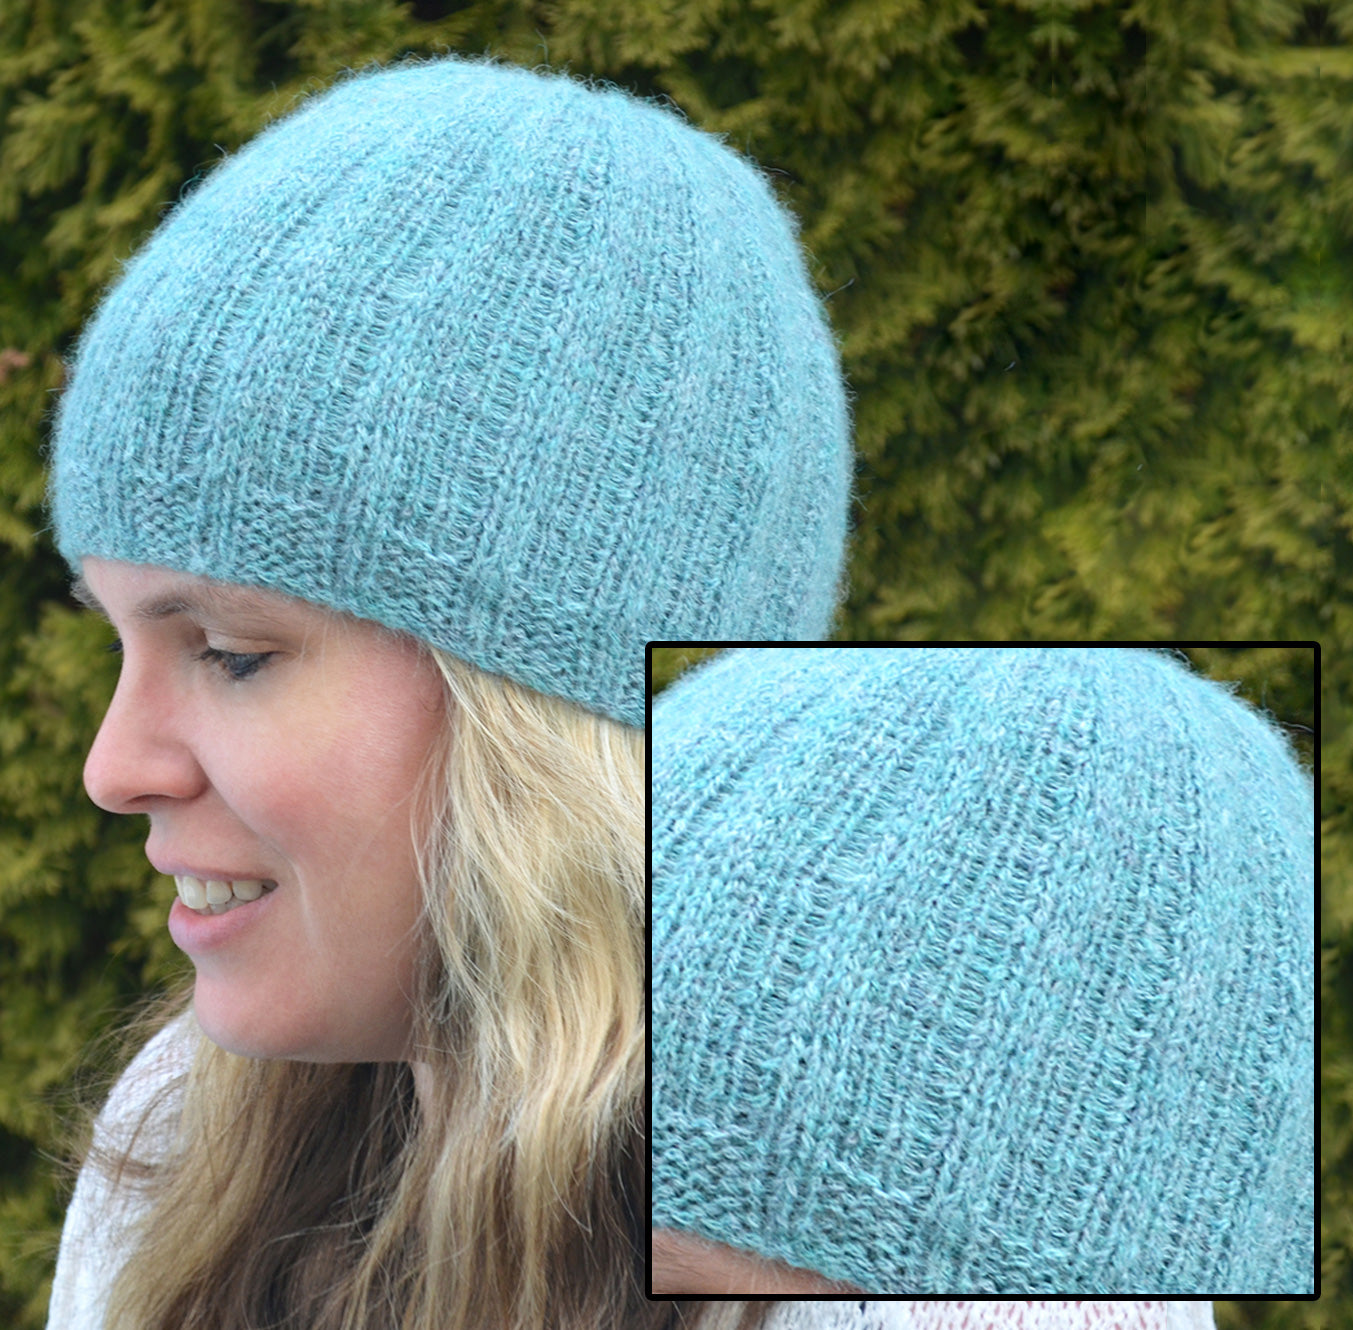 Free knitting pattern for baby hat using worsted weight yarn